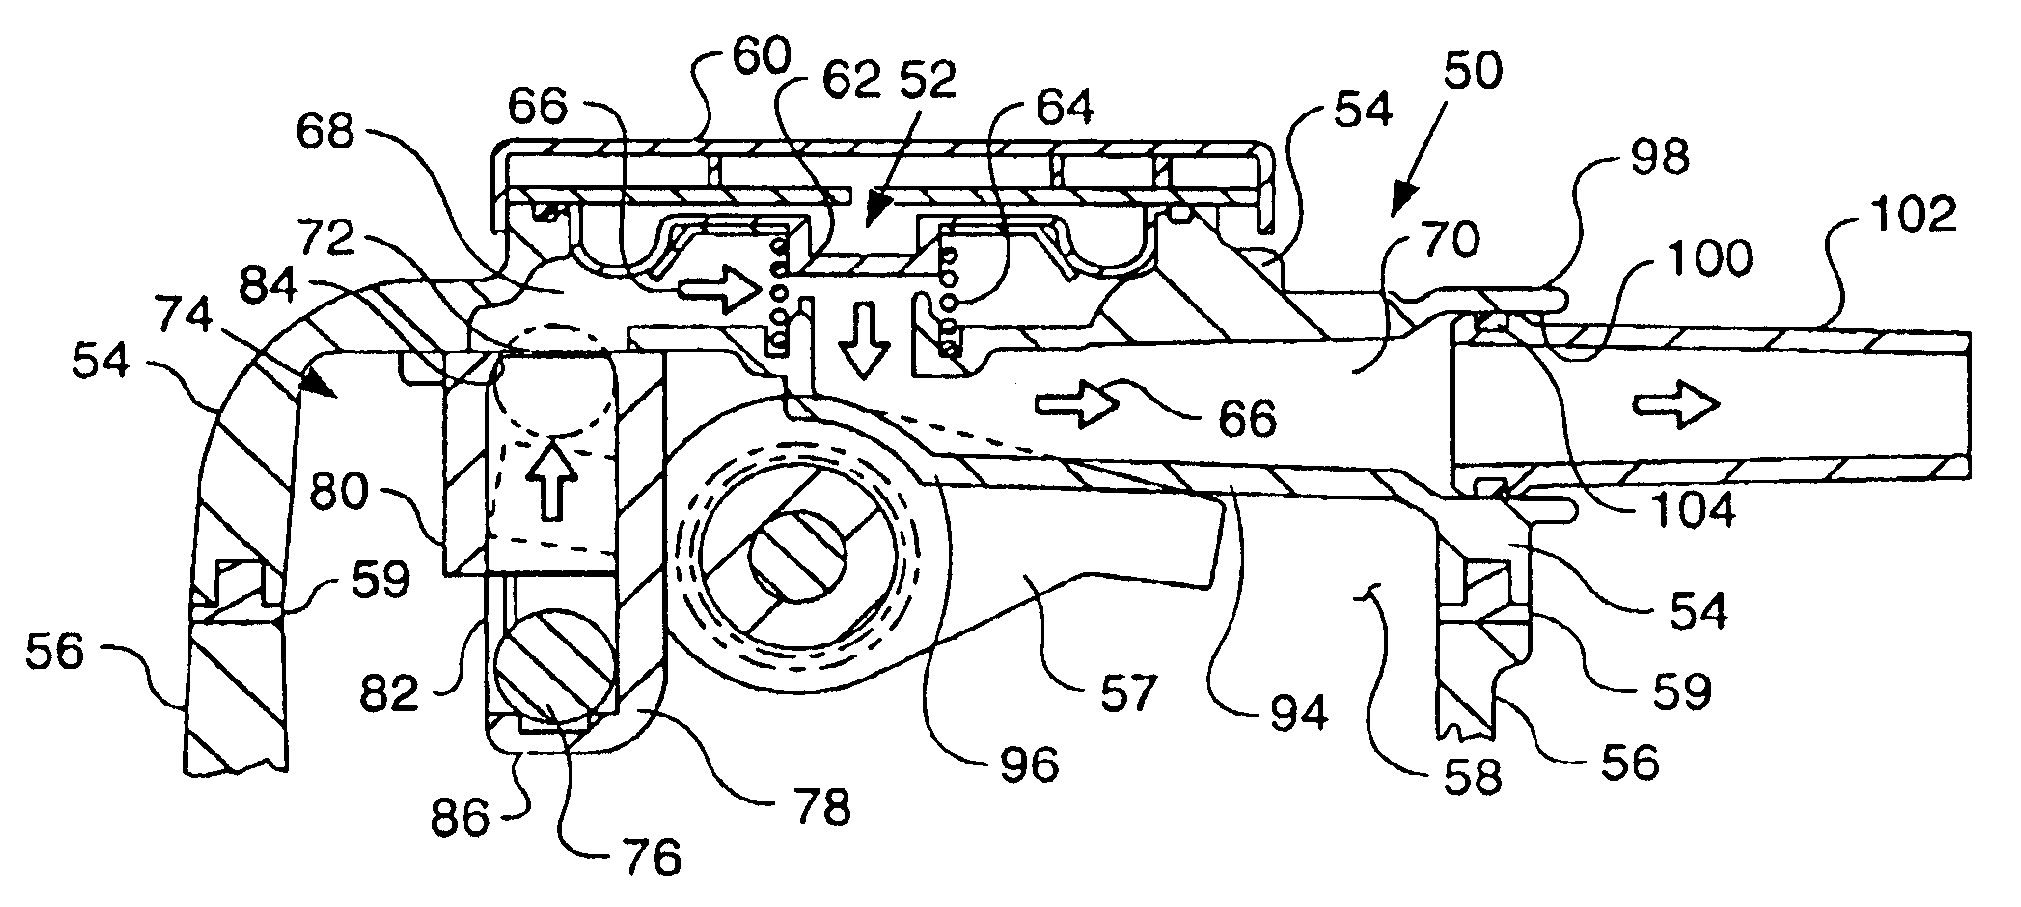 Combined shut-off valve and cover for an engine breather system